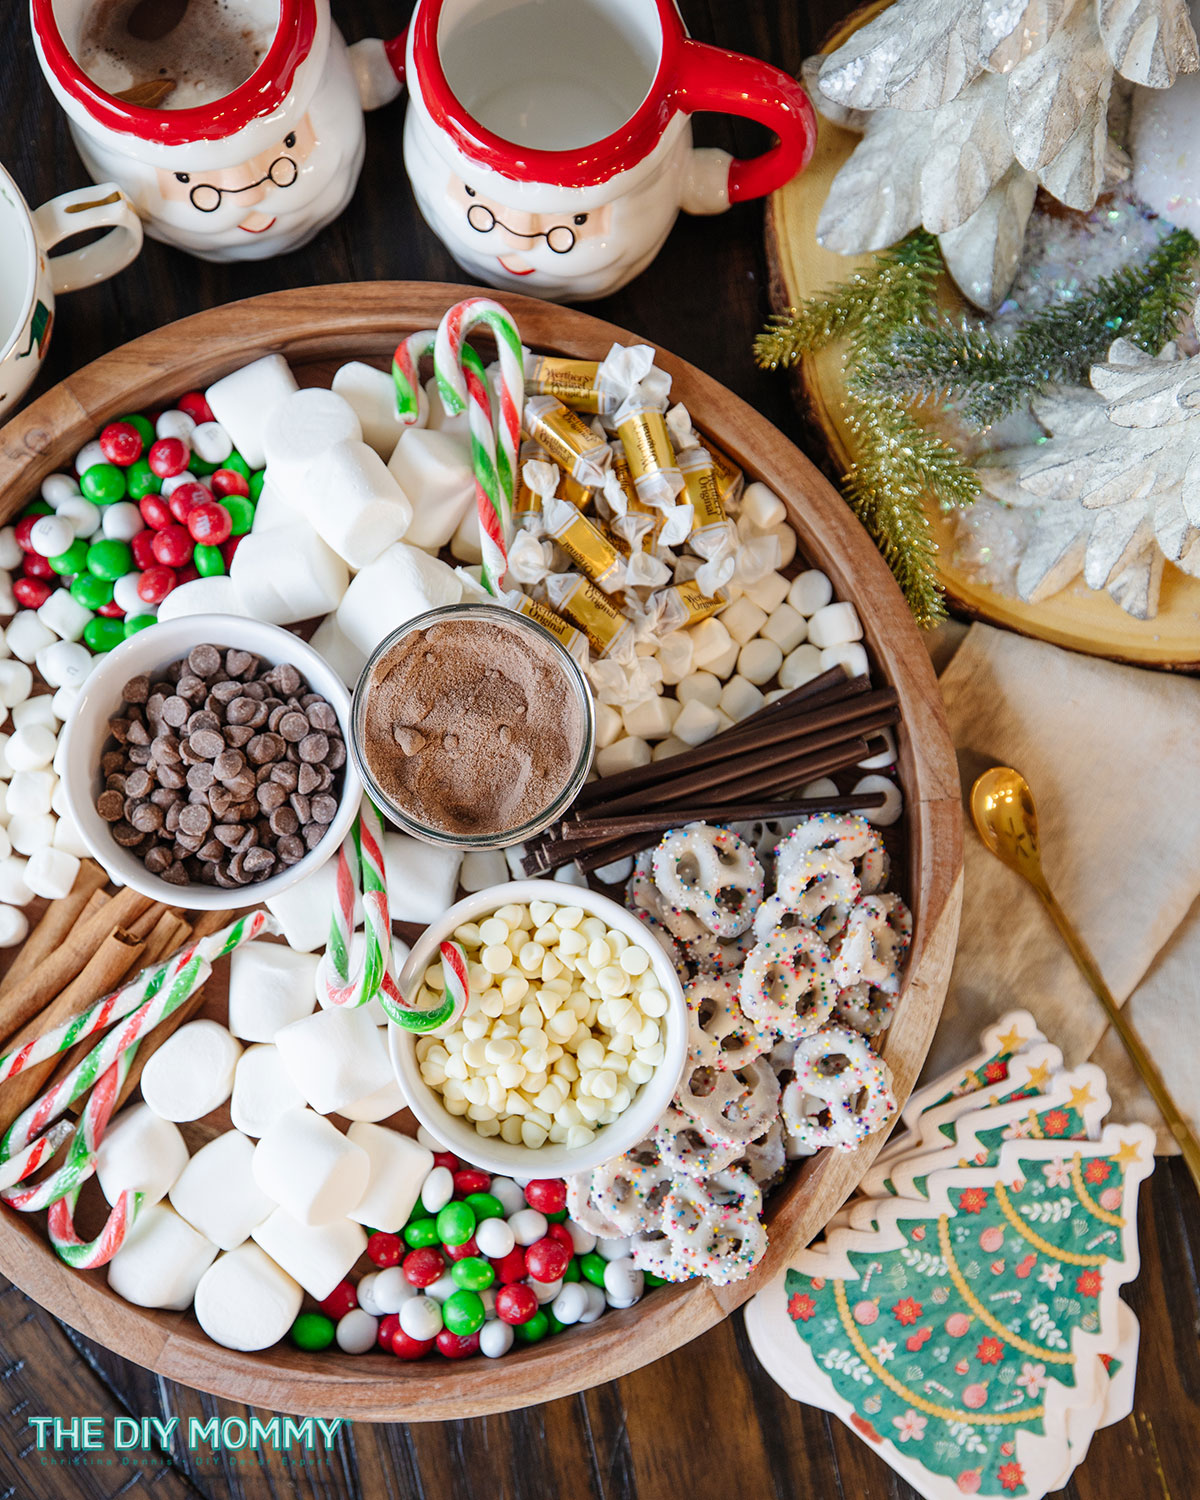 Create a Festive Hot Chocolate Station on a Tray for Your Christmas Party